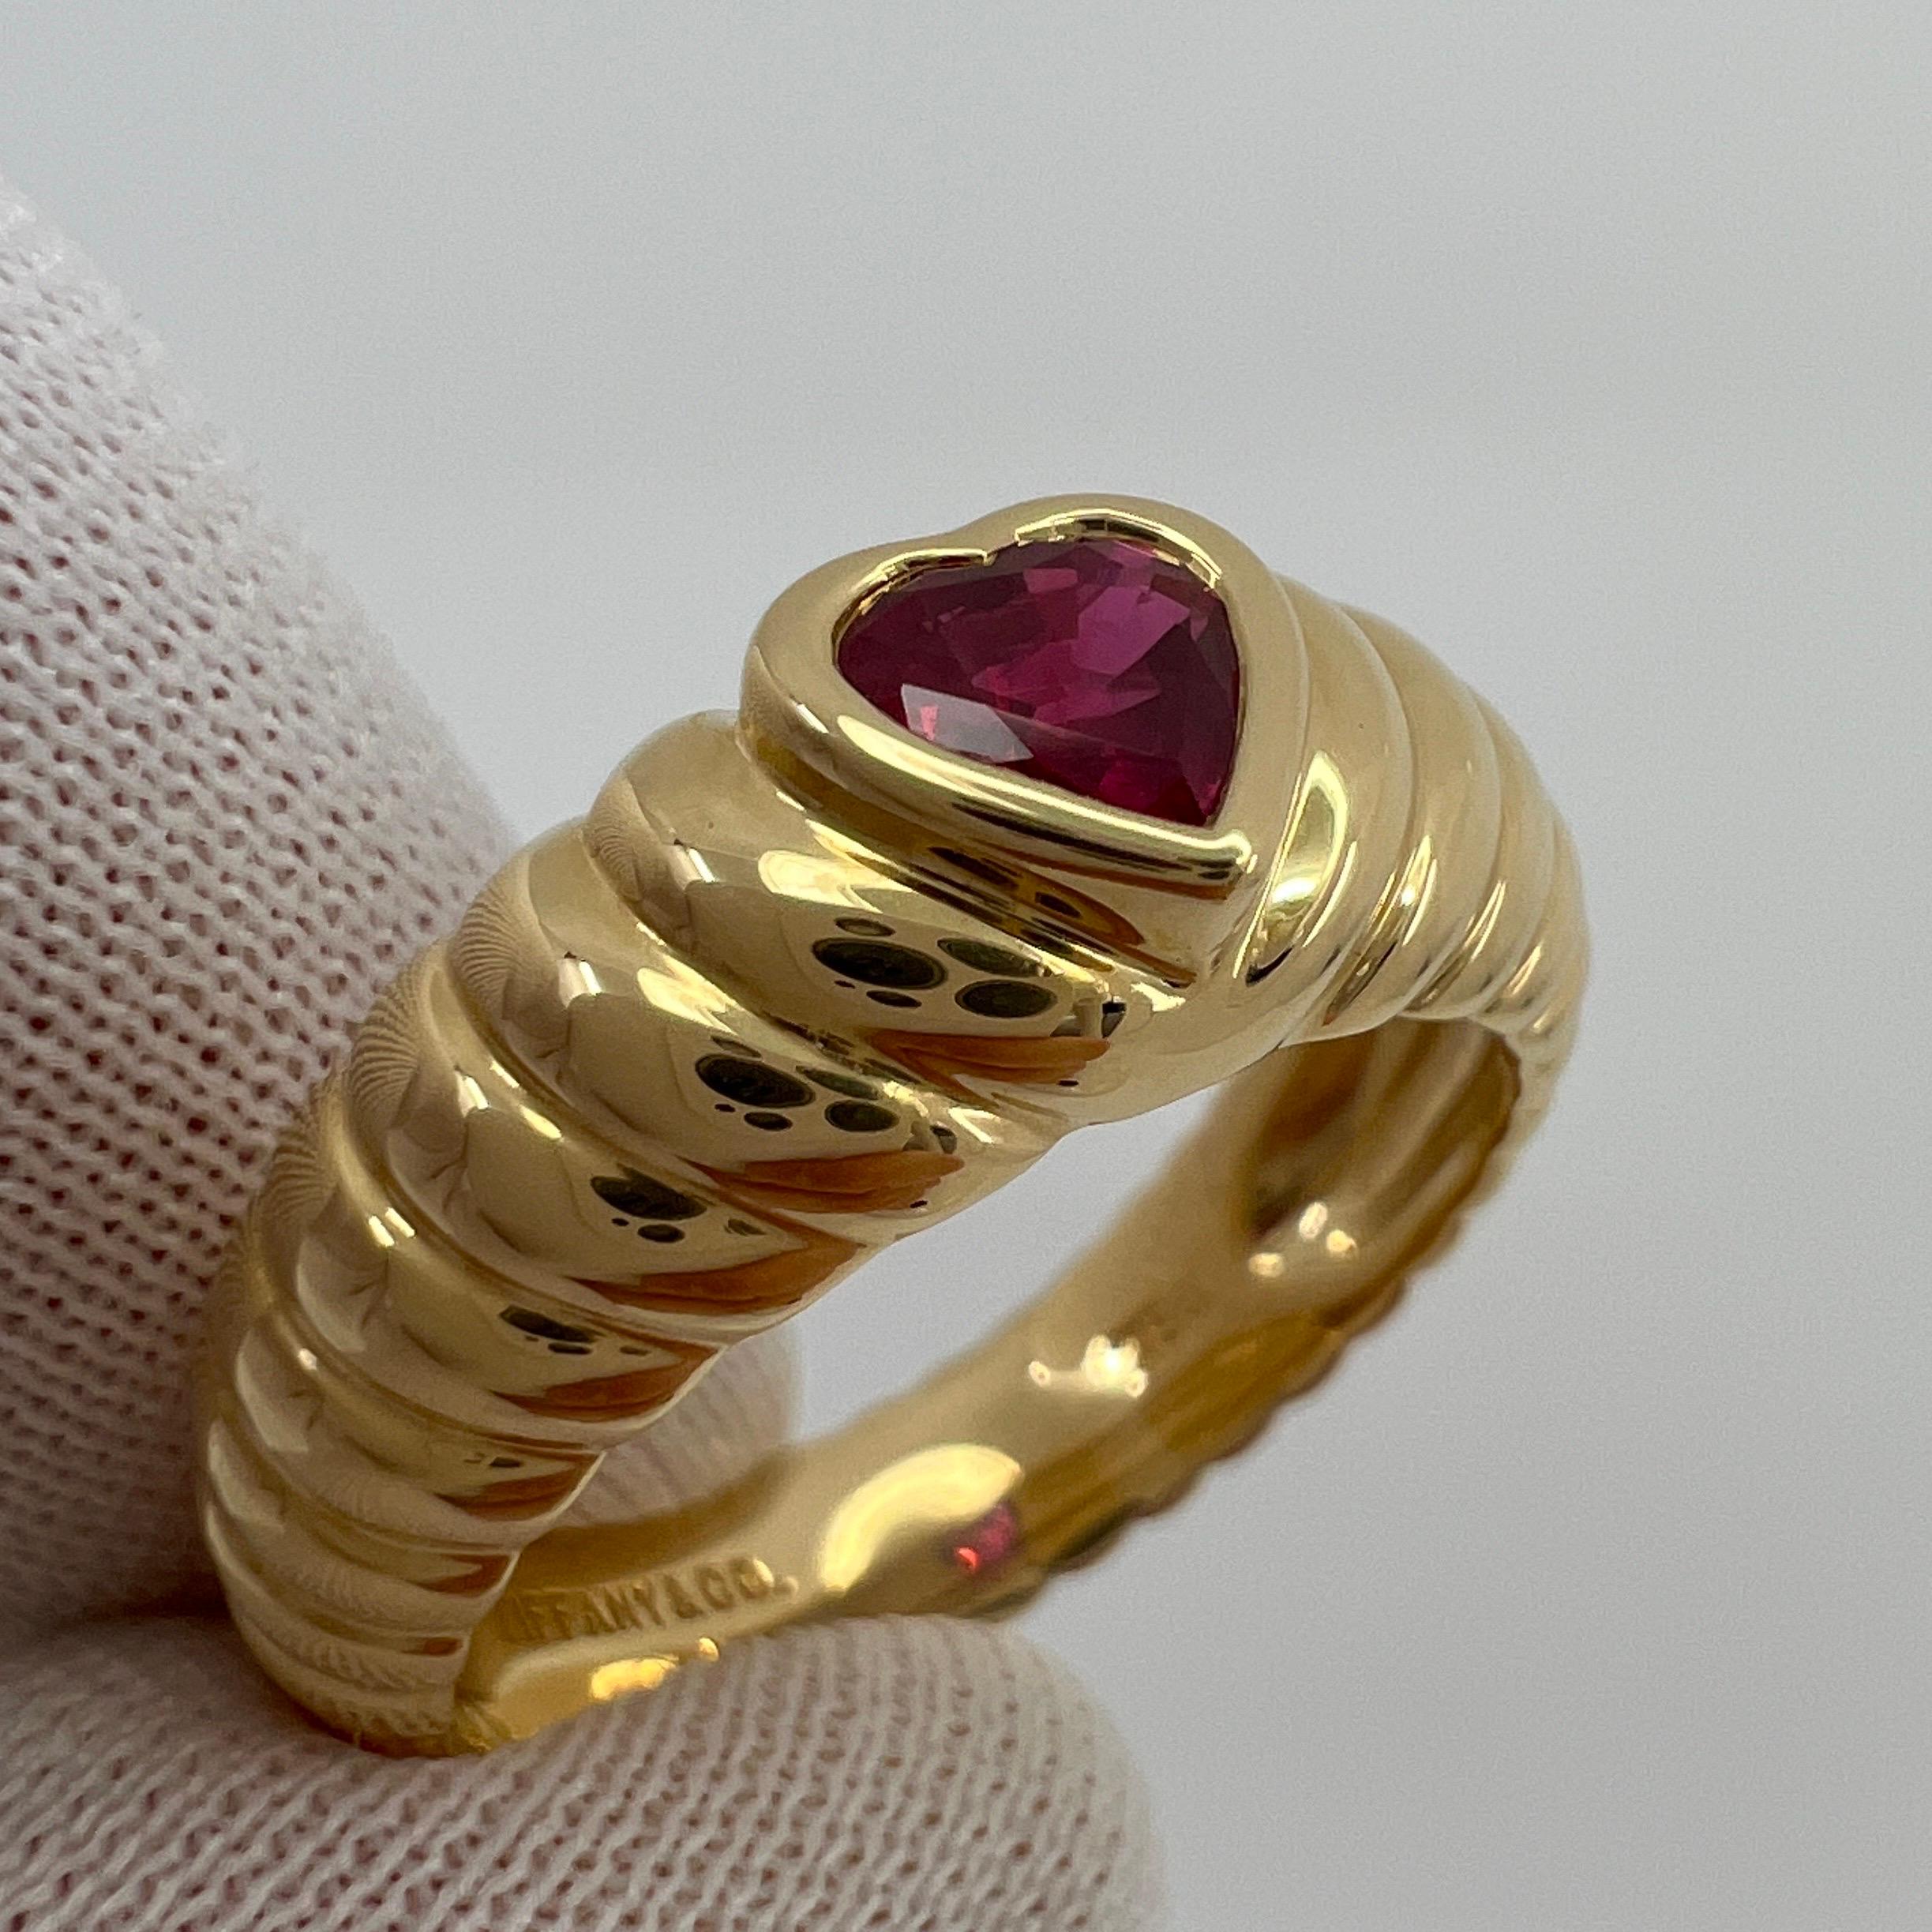 Women's Vintage Tiffany & Co. Vivid Blood Red Ruby Heart Cut 18k Yellow Gold Band Ring